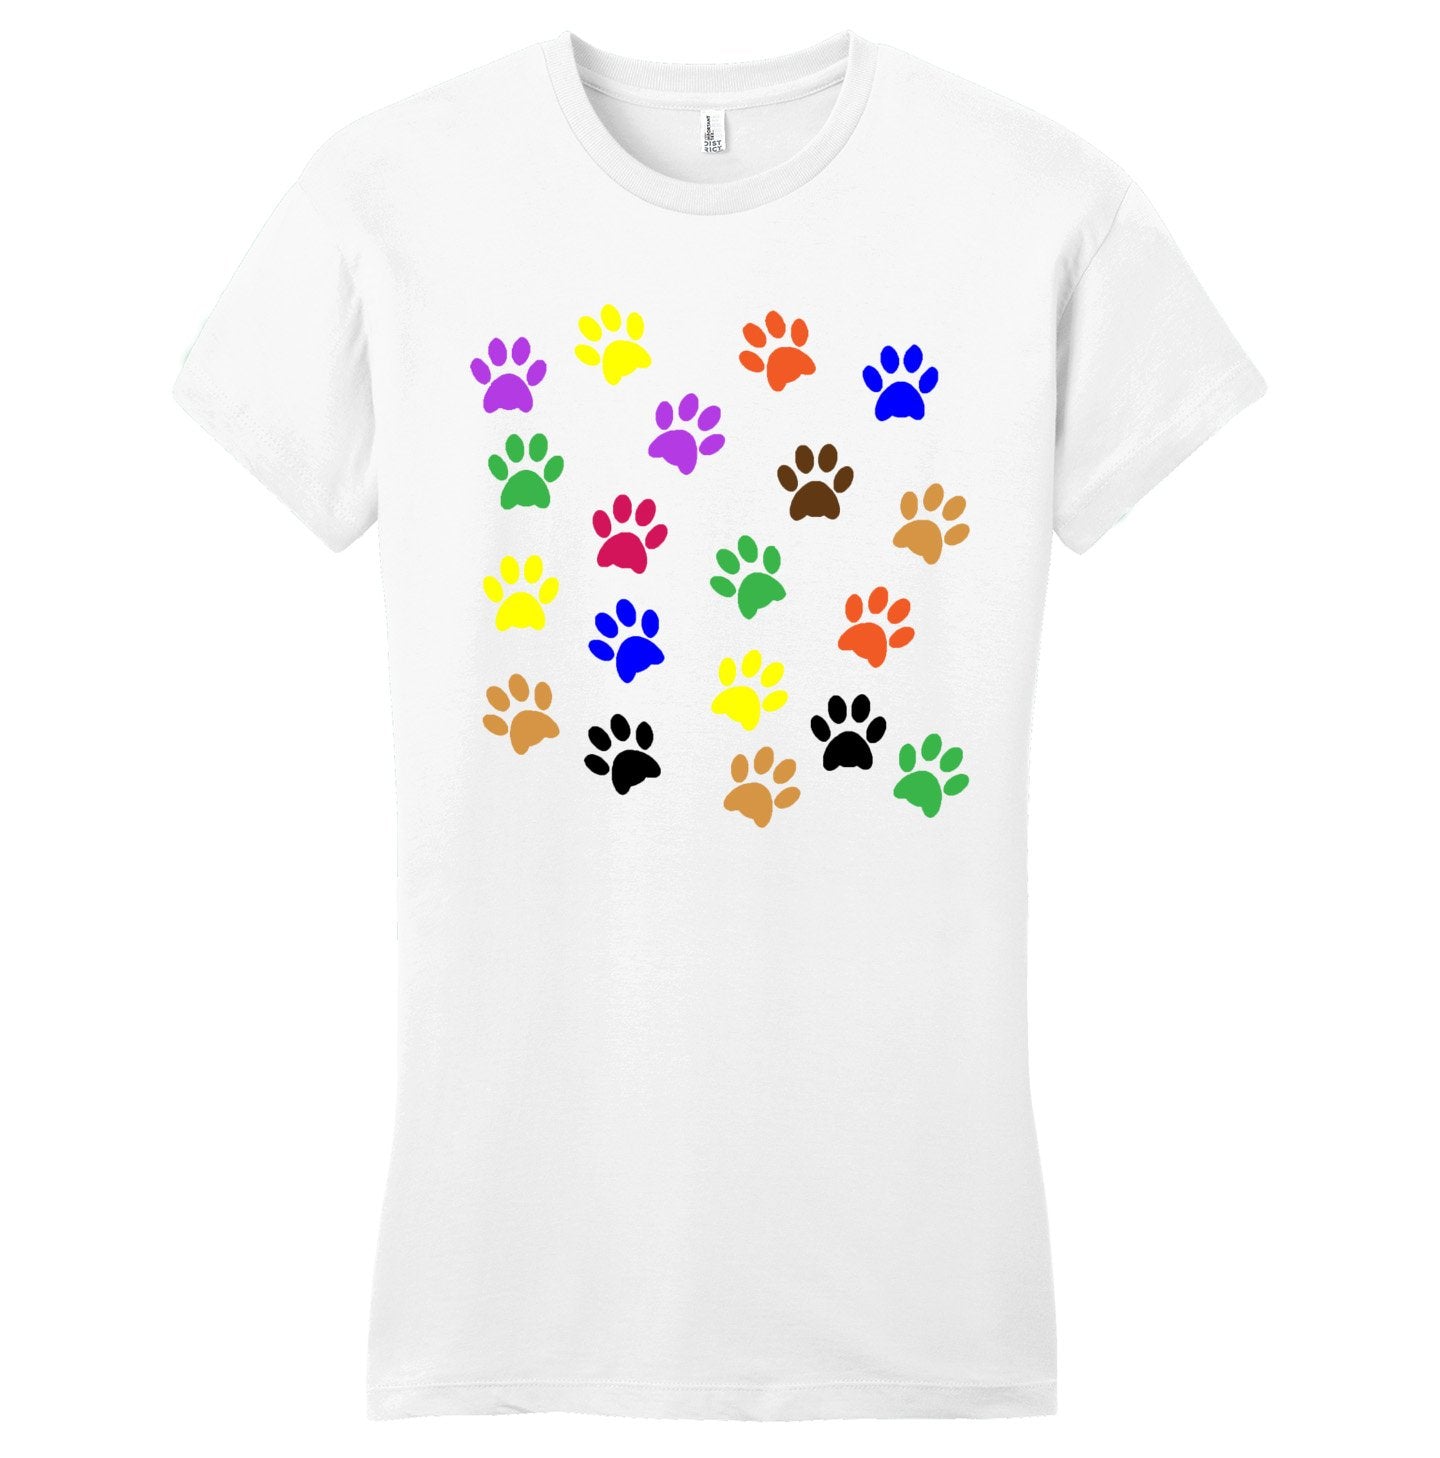 Colorful Paw Prints - Women's Fitted T-Shirt - Animal Tee